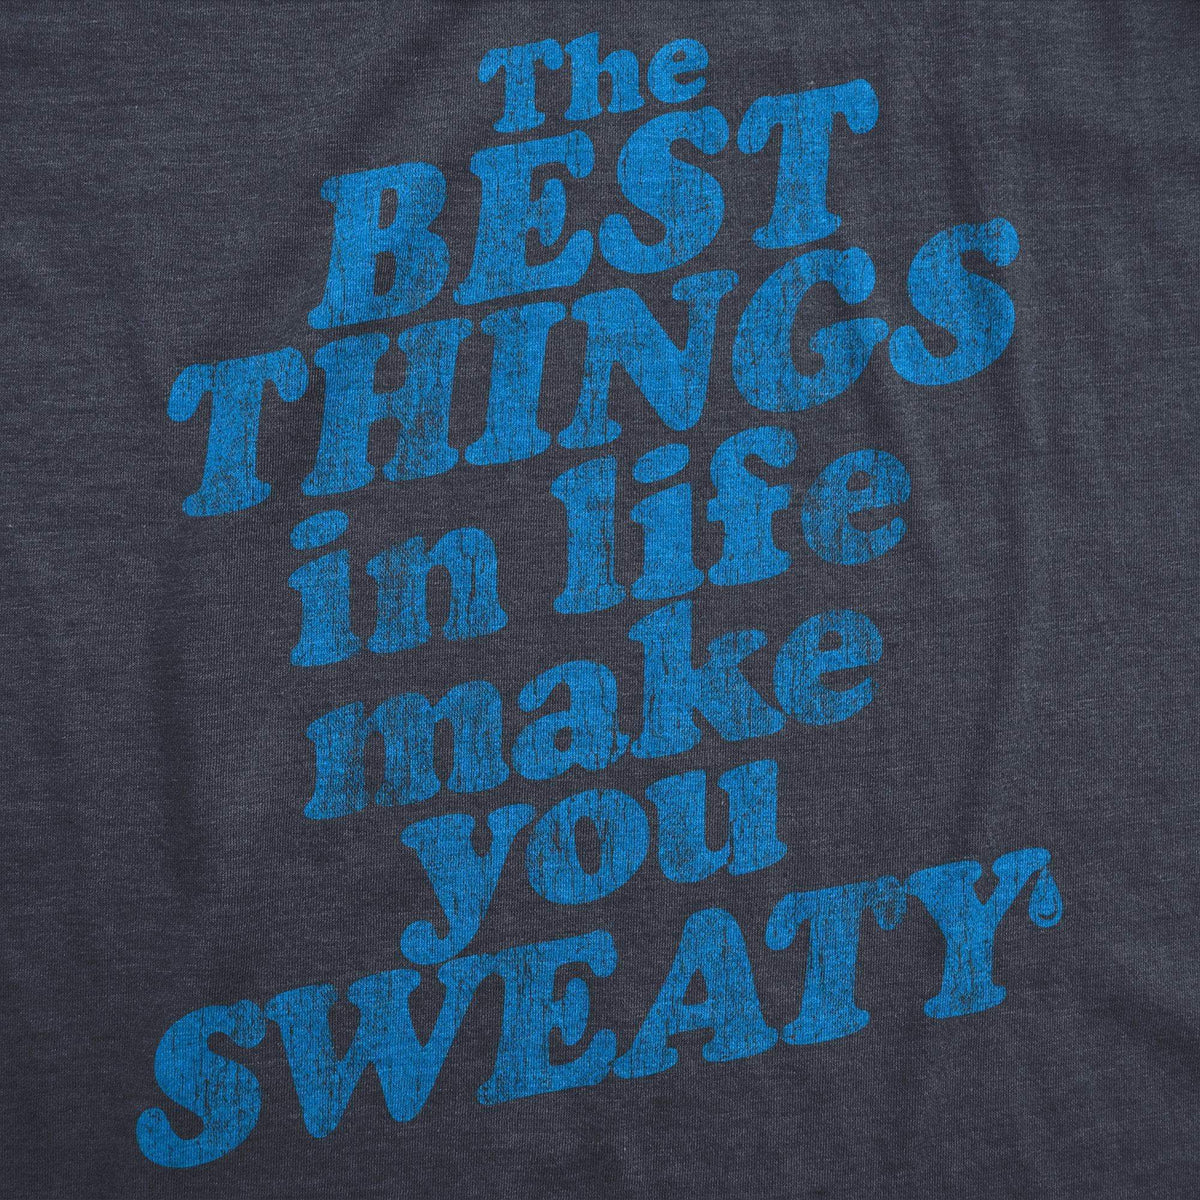 The Best Things In Life Make You Sweat Women&#39;s Tshirt - Crazy Dog T-Shirts